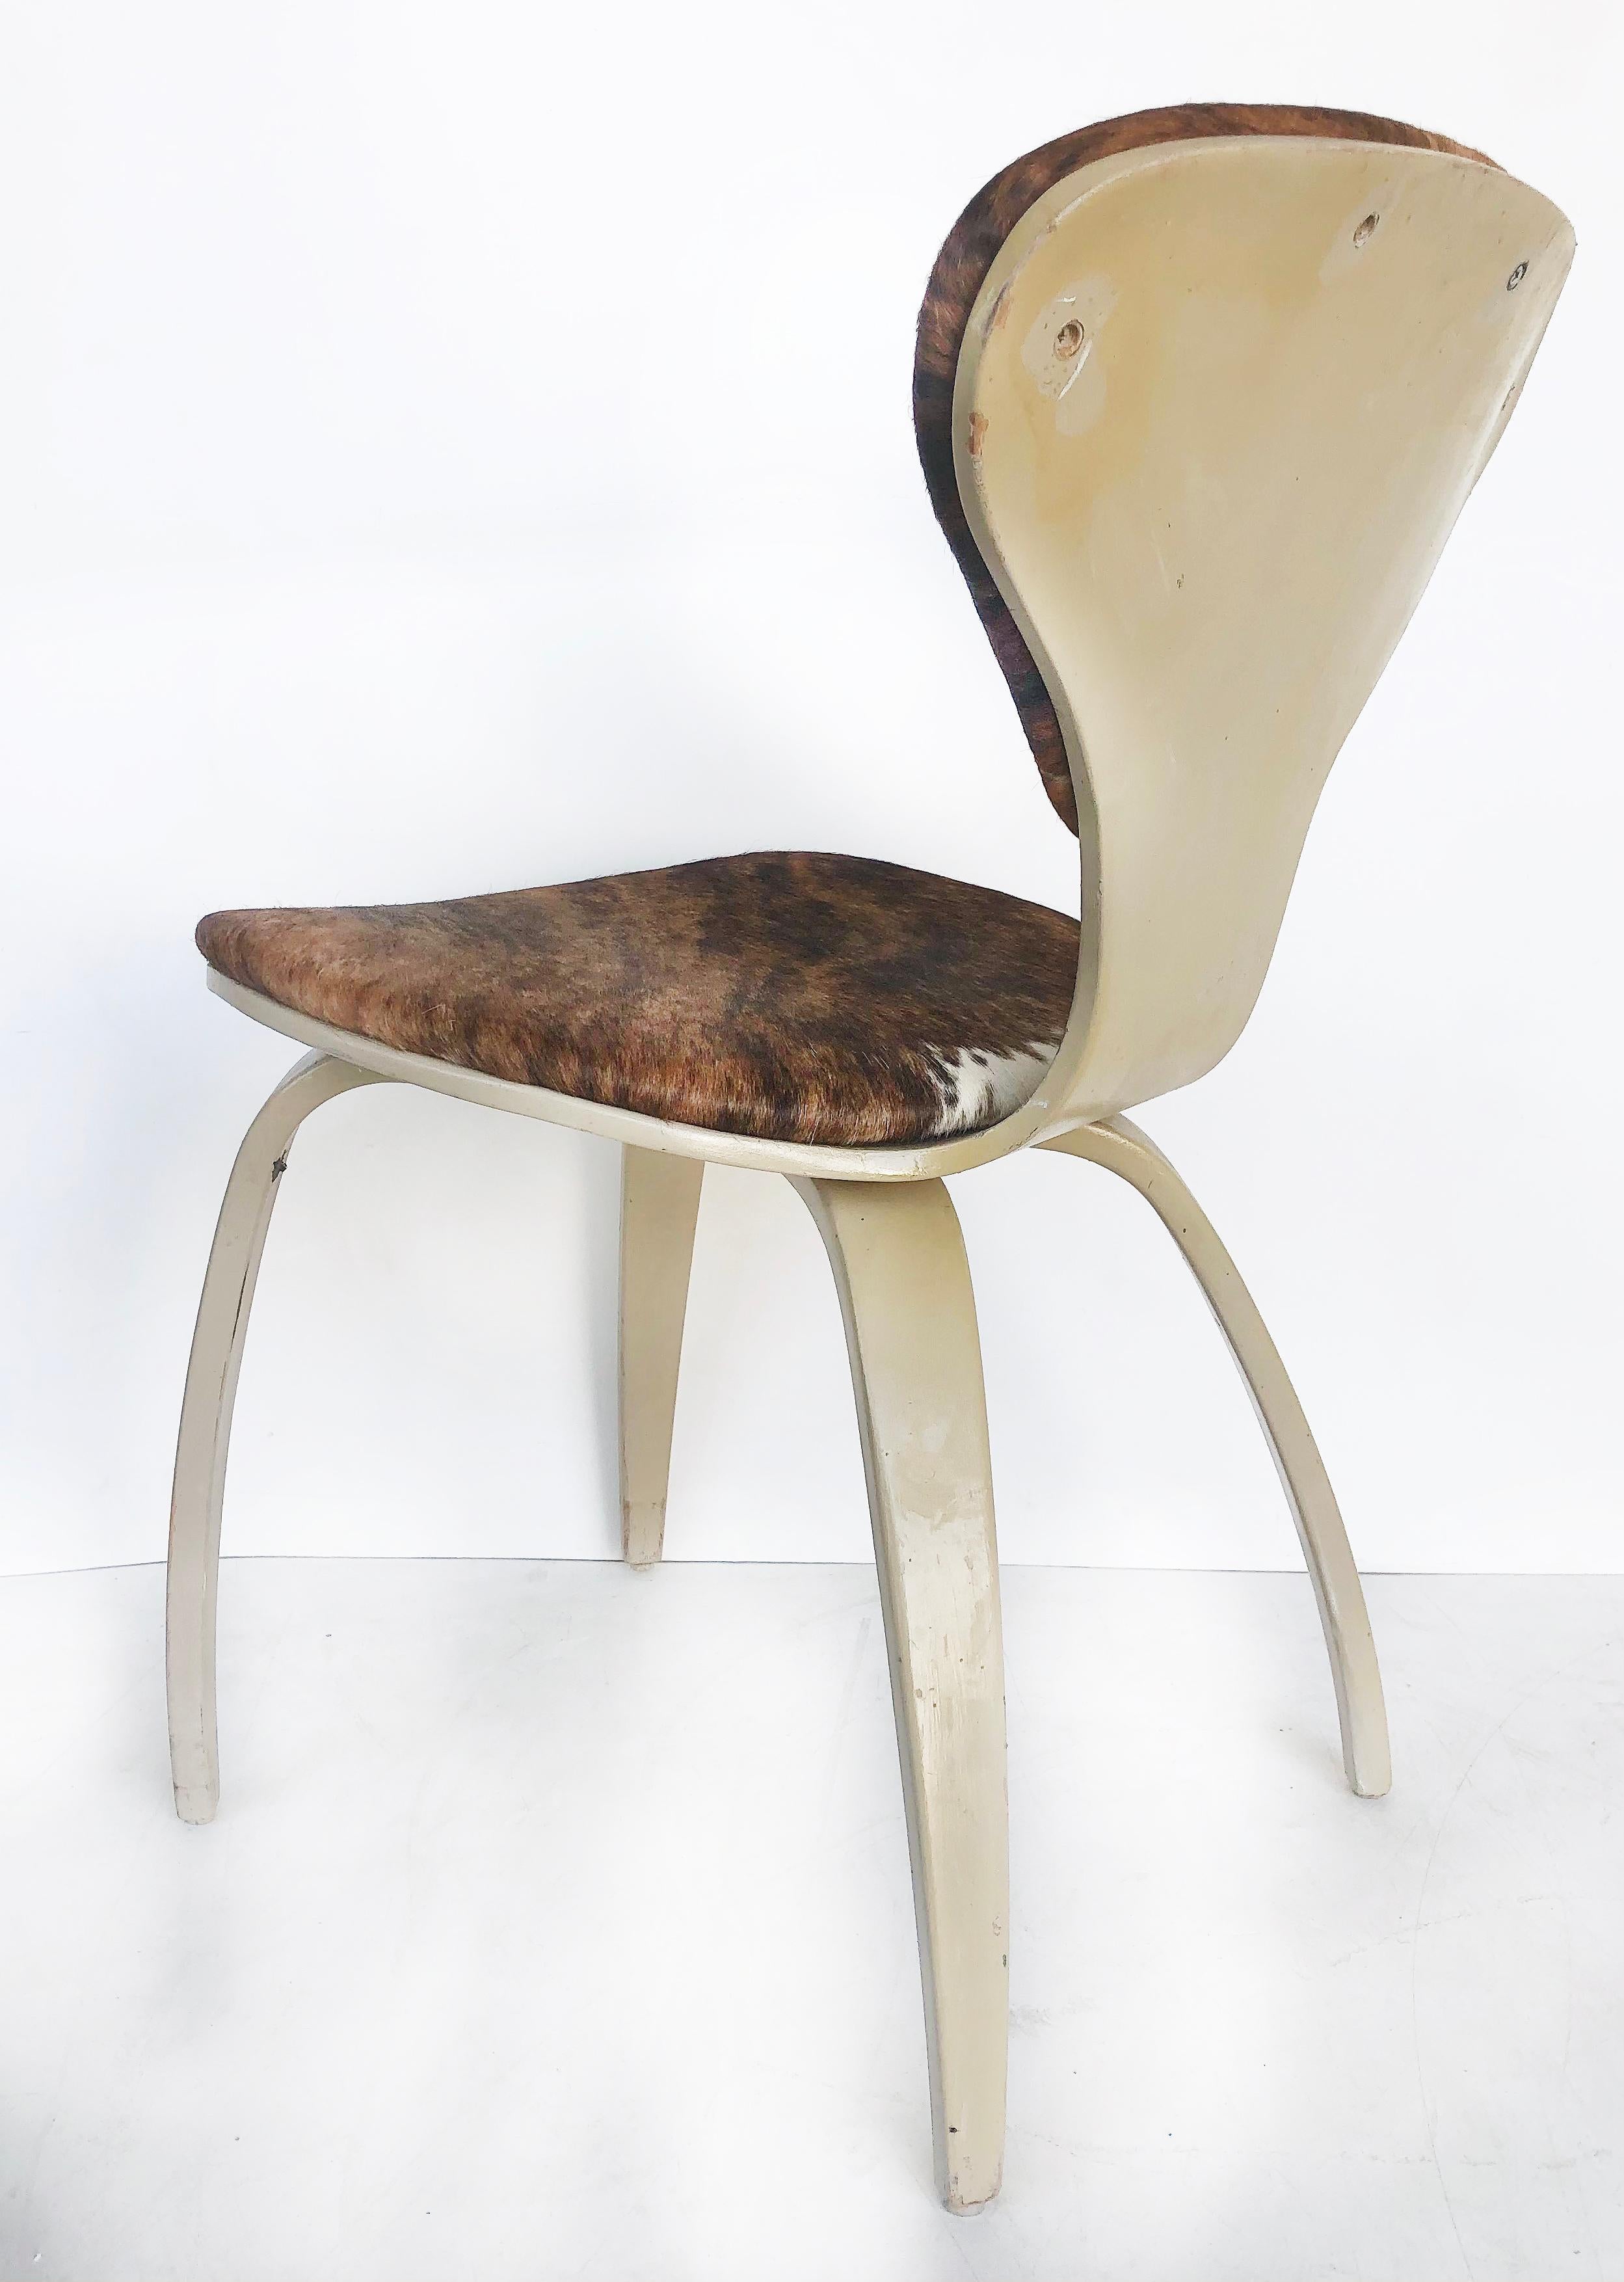 Norman Cherner Plycraft Chair Upholstered in Cowhide and Painted 1